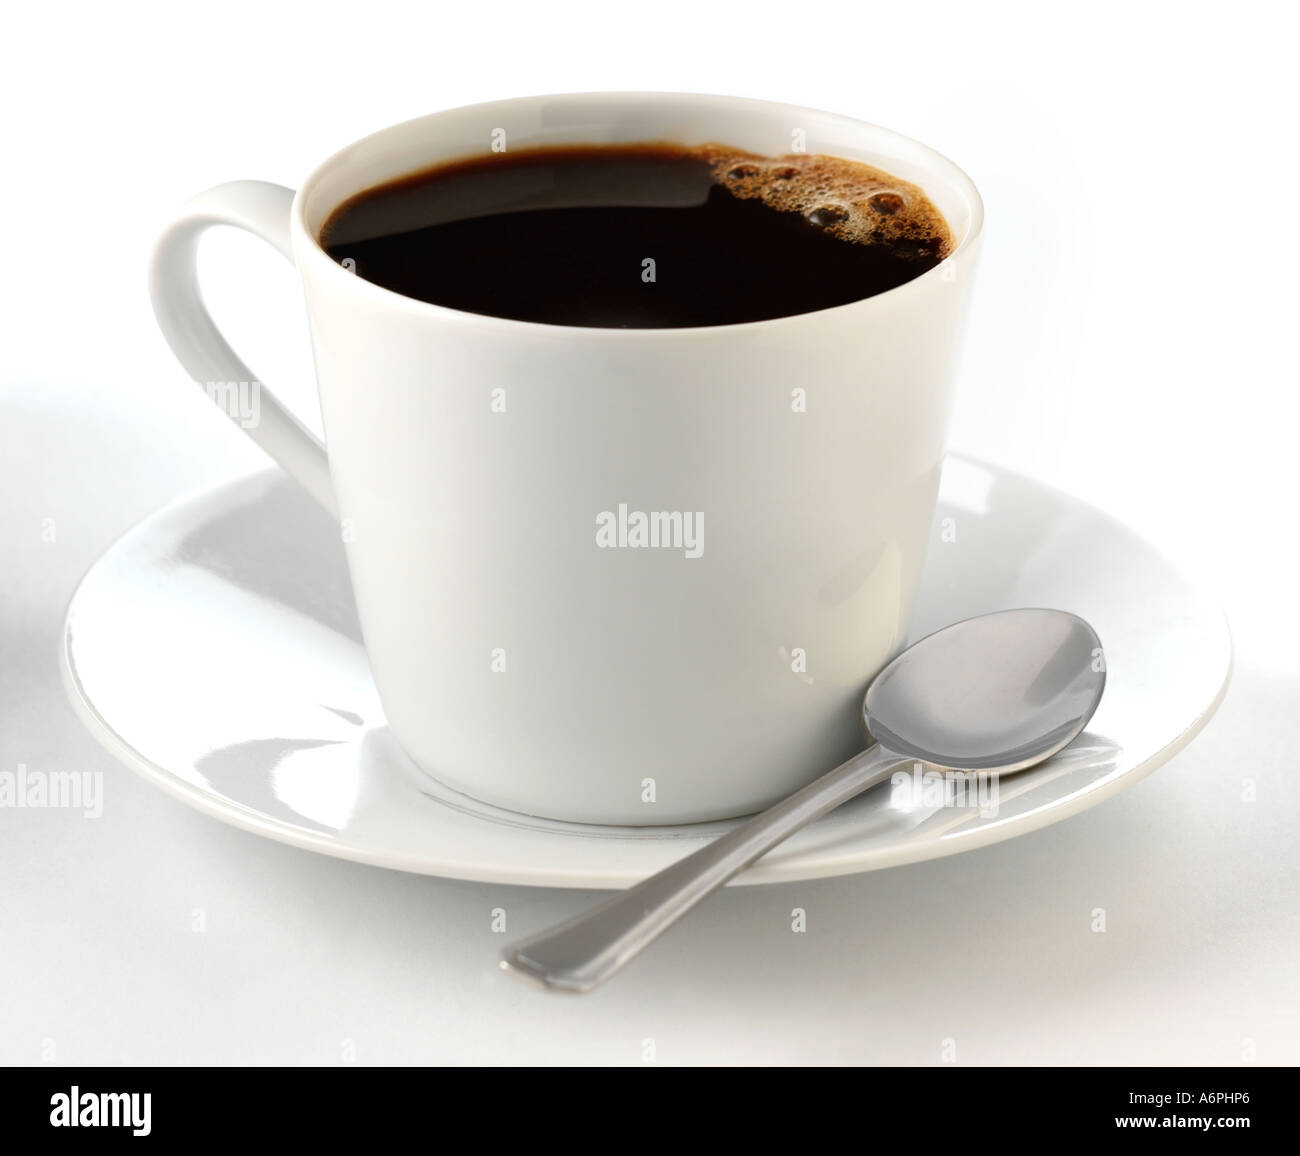 A CUP OF BLACK COFFEE IN WHITE CUP AND SAUCER Stock Photo